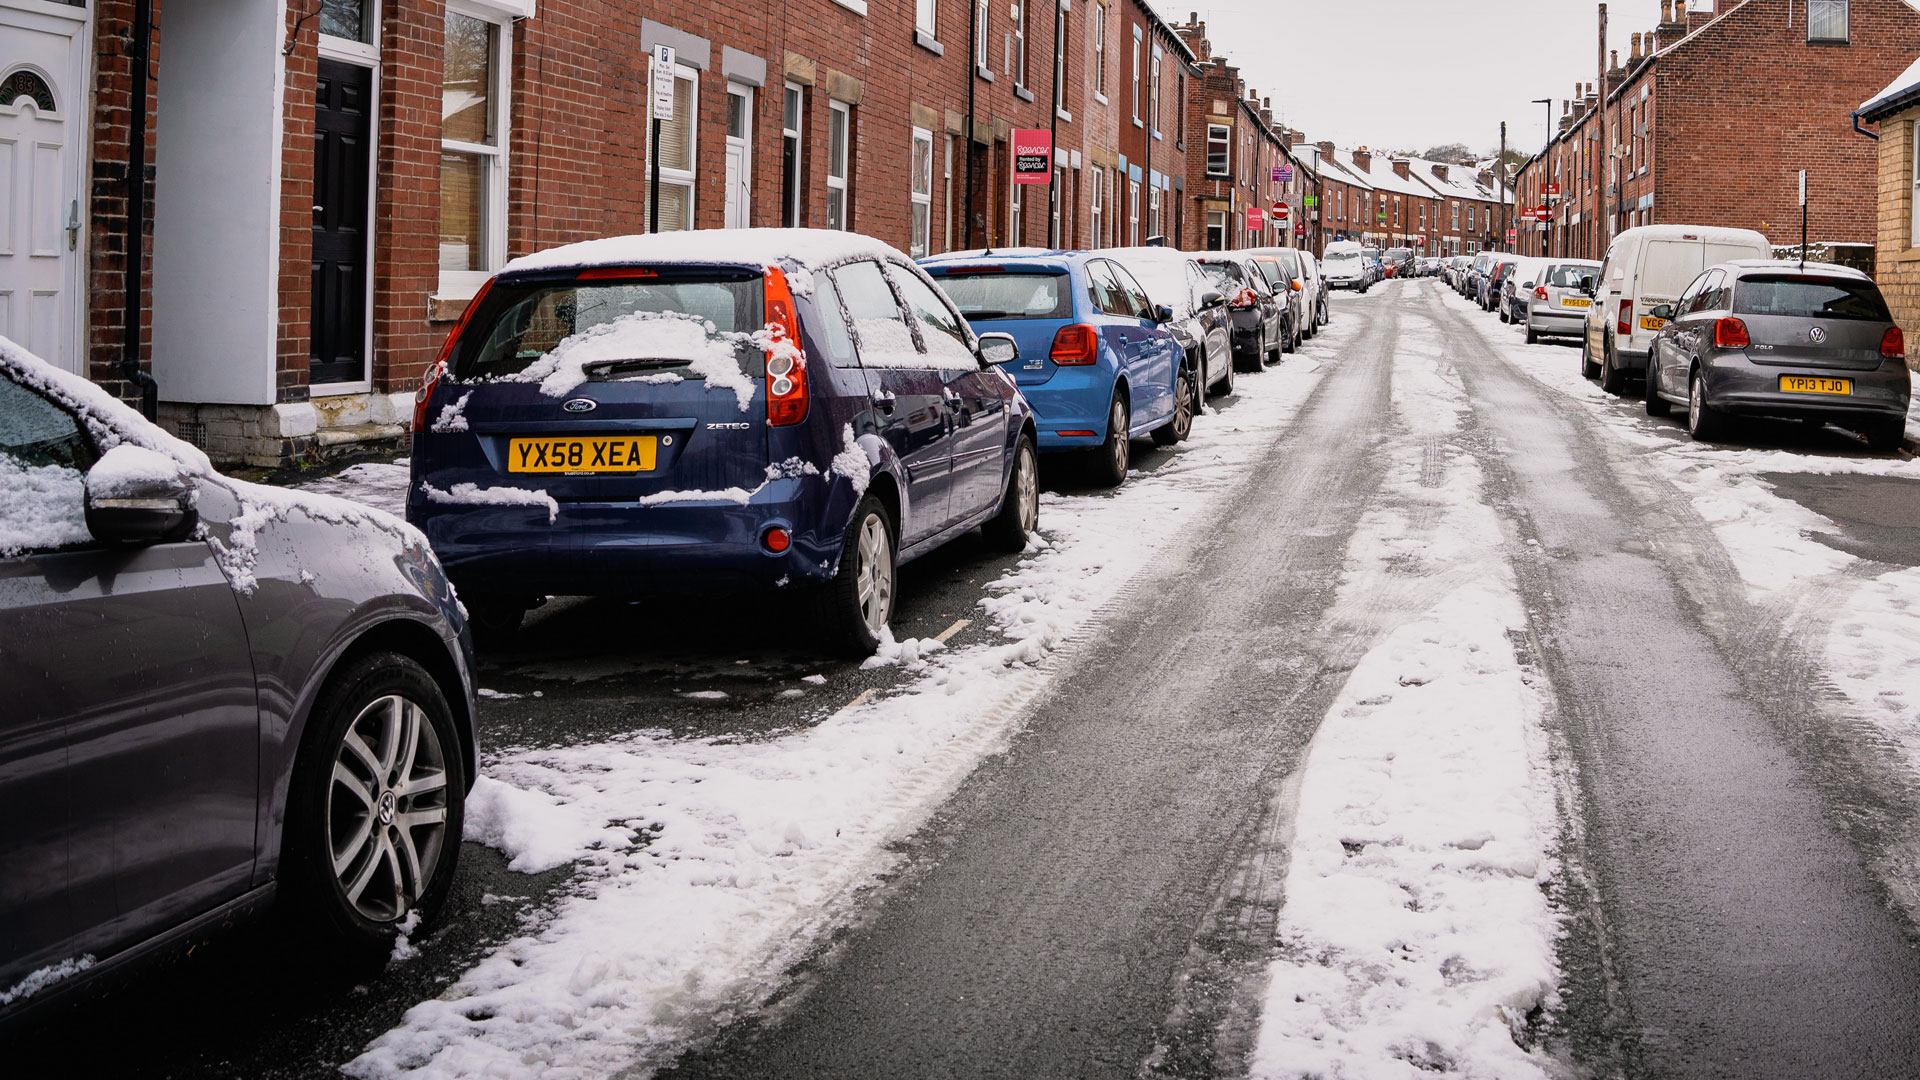 Cars parked on road in Winter snow